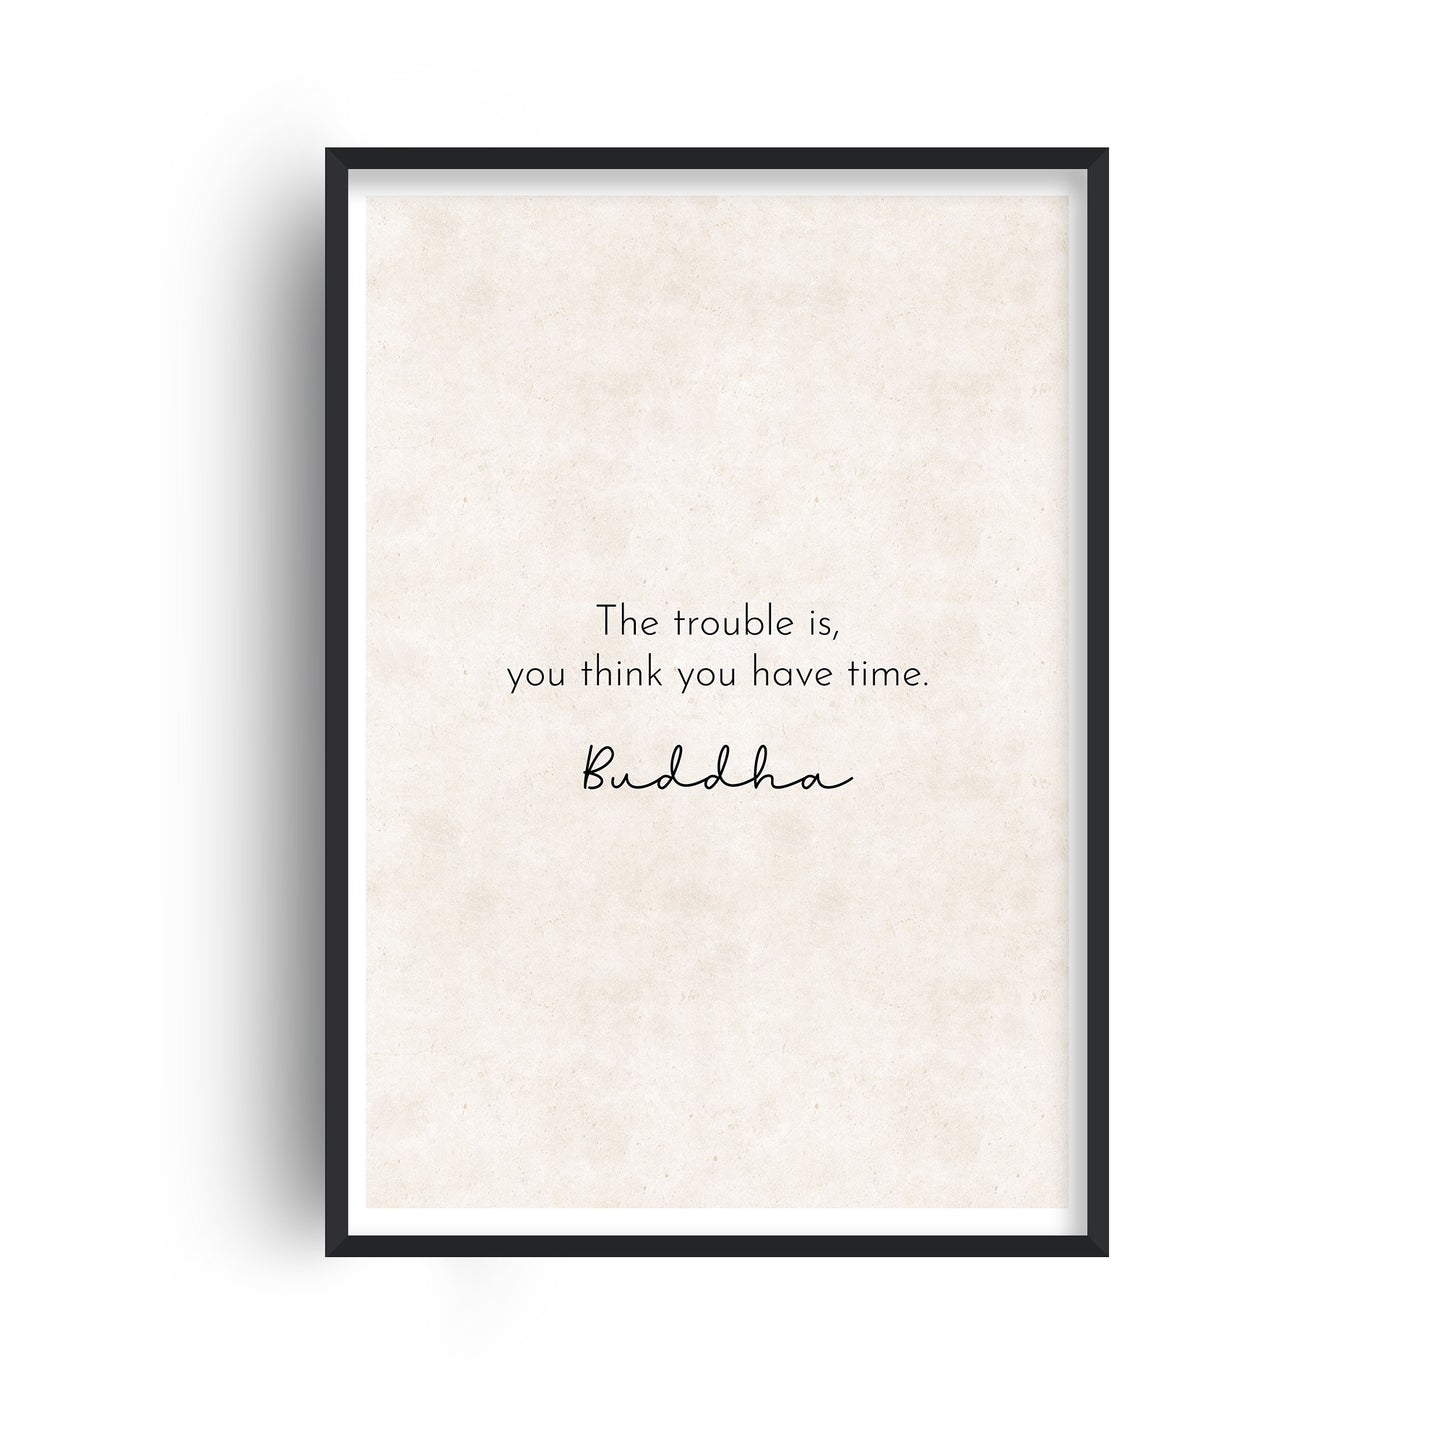 The Trouble Is - Buddha Quote Print